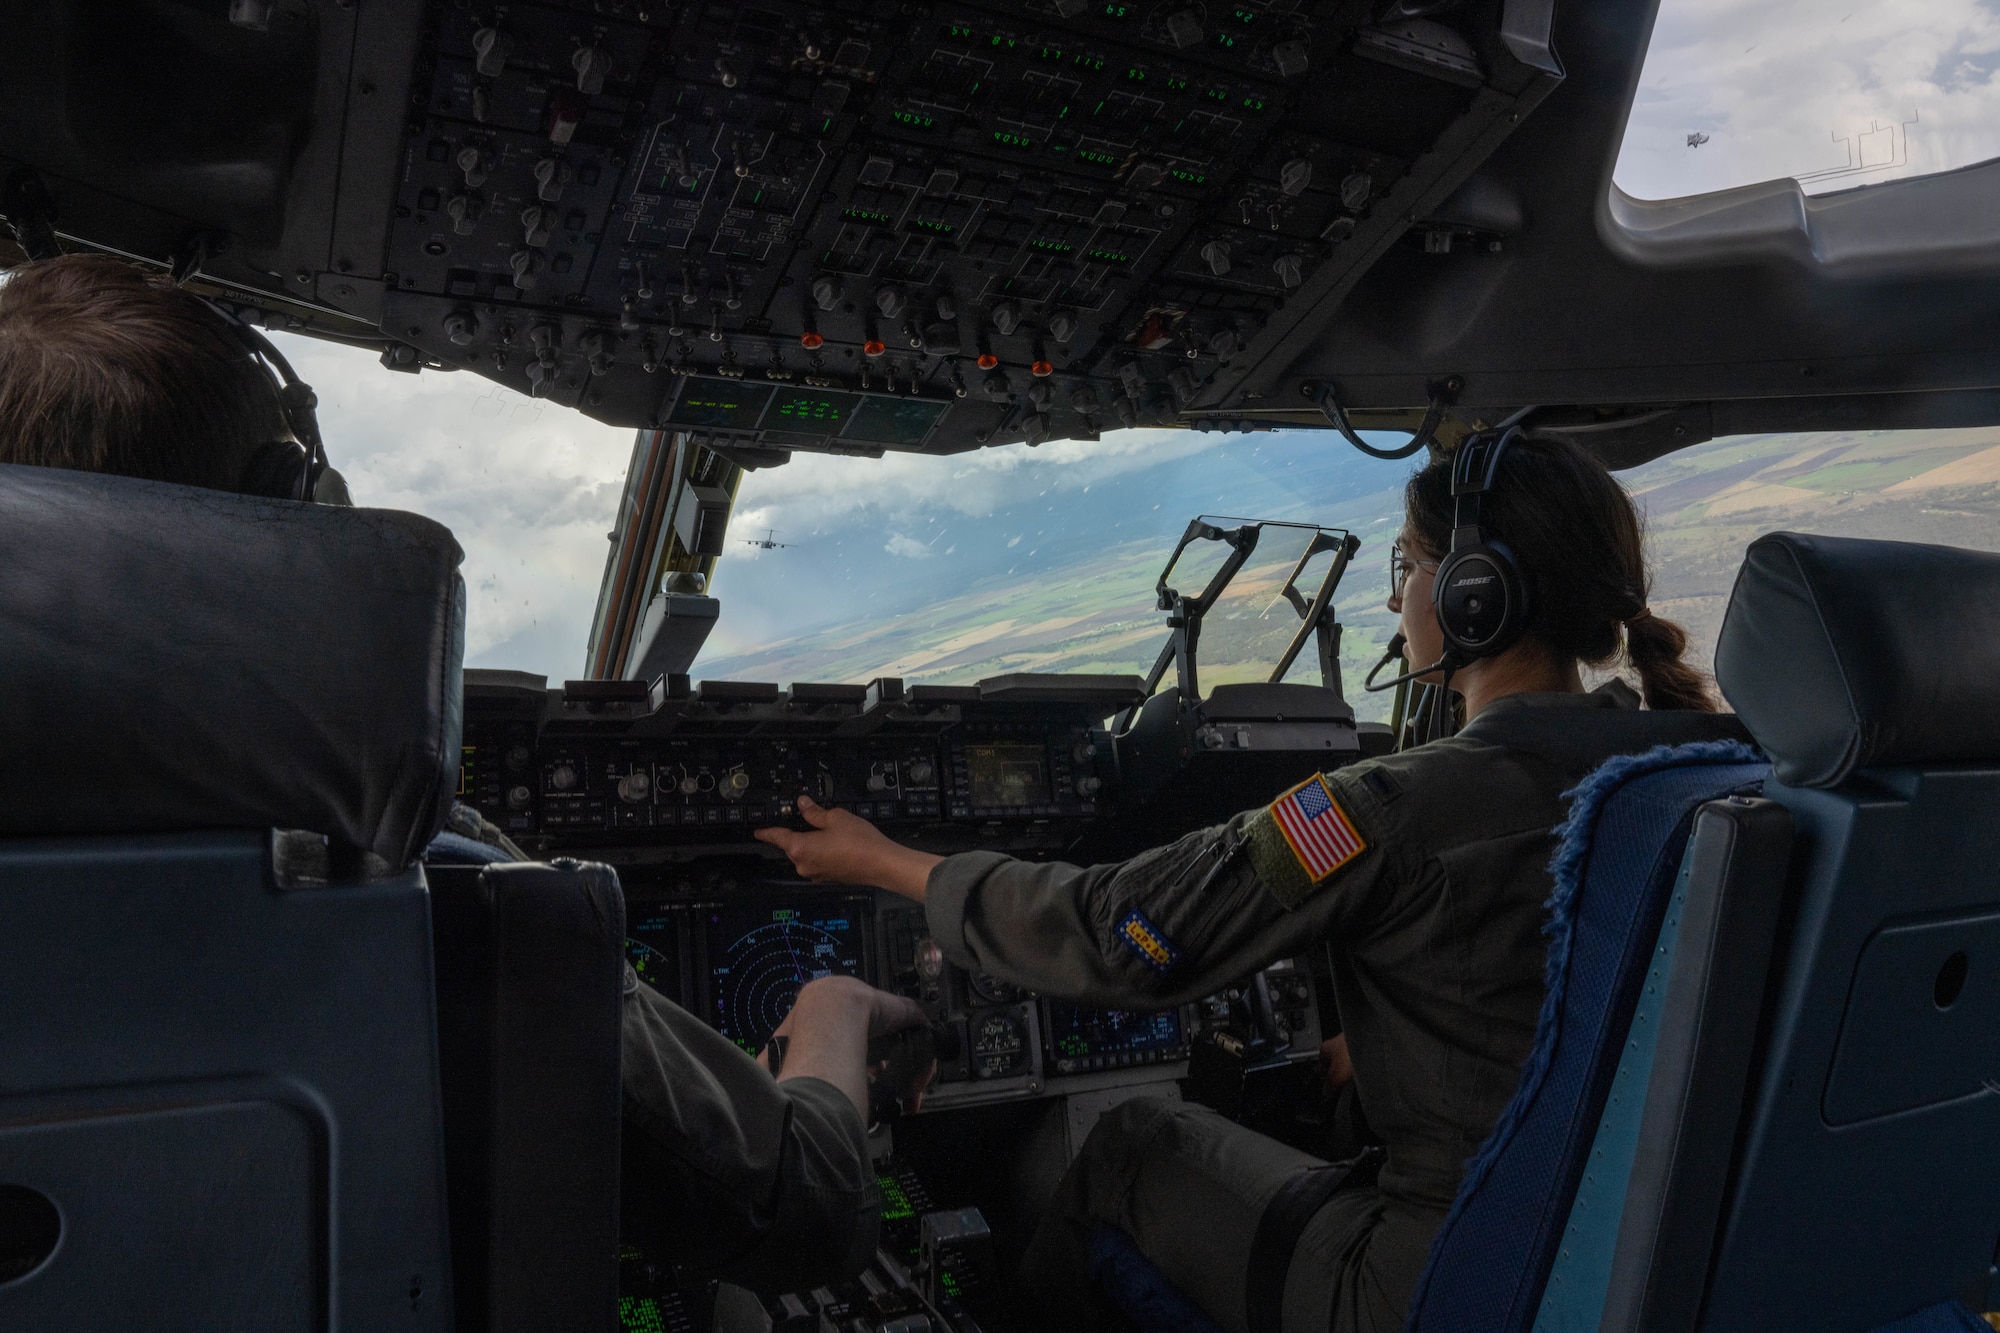 U.S Air Force 1st Lt. Cassidy Mullen, 535th Airlift Squadron pilot, flies a C-17 Globemaster III during a training flight during Exercise Global Dexterity 23-2 around Queensland, Australia, Nov. 28, 2023. This exercise is designed so that the U.S. Air Force and the Royal Australian Air Force can develop bilateral tactical airlift capabilities and learn from each other to strengthen partnerships in the Indo-Pacific Region.(U.S. Air Force photo by Senior Airman Makensie Cooper)